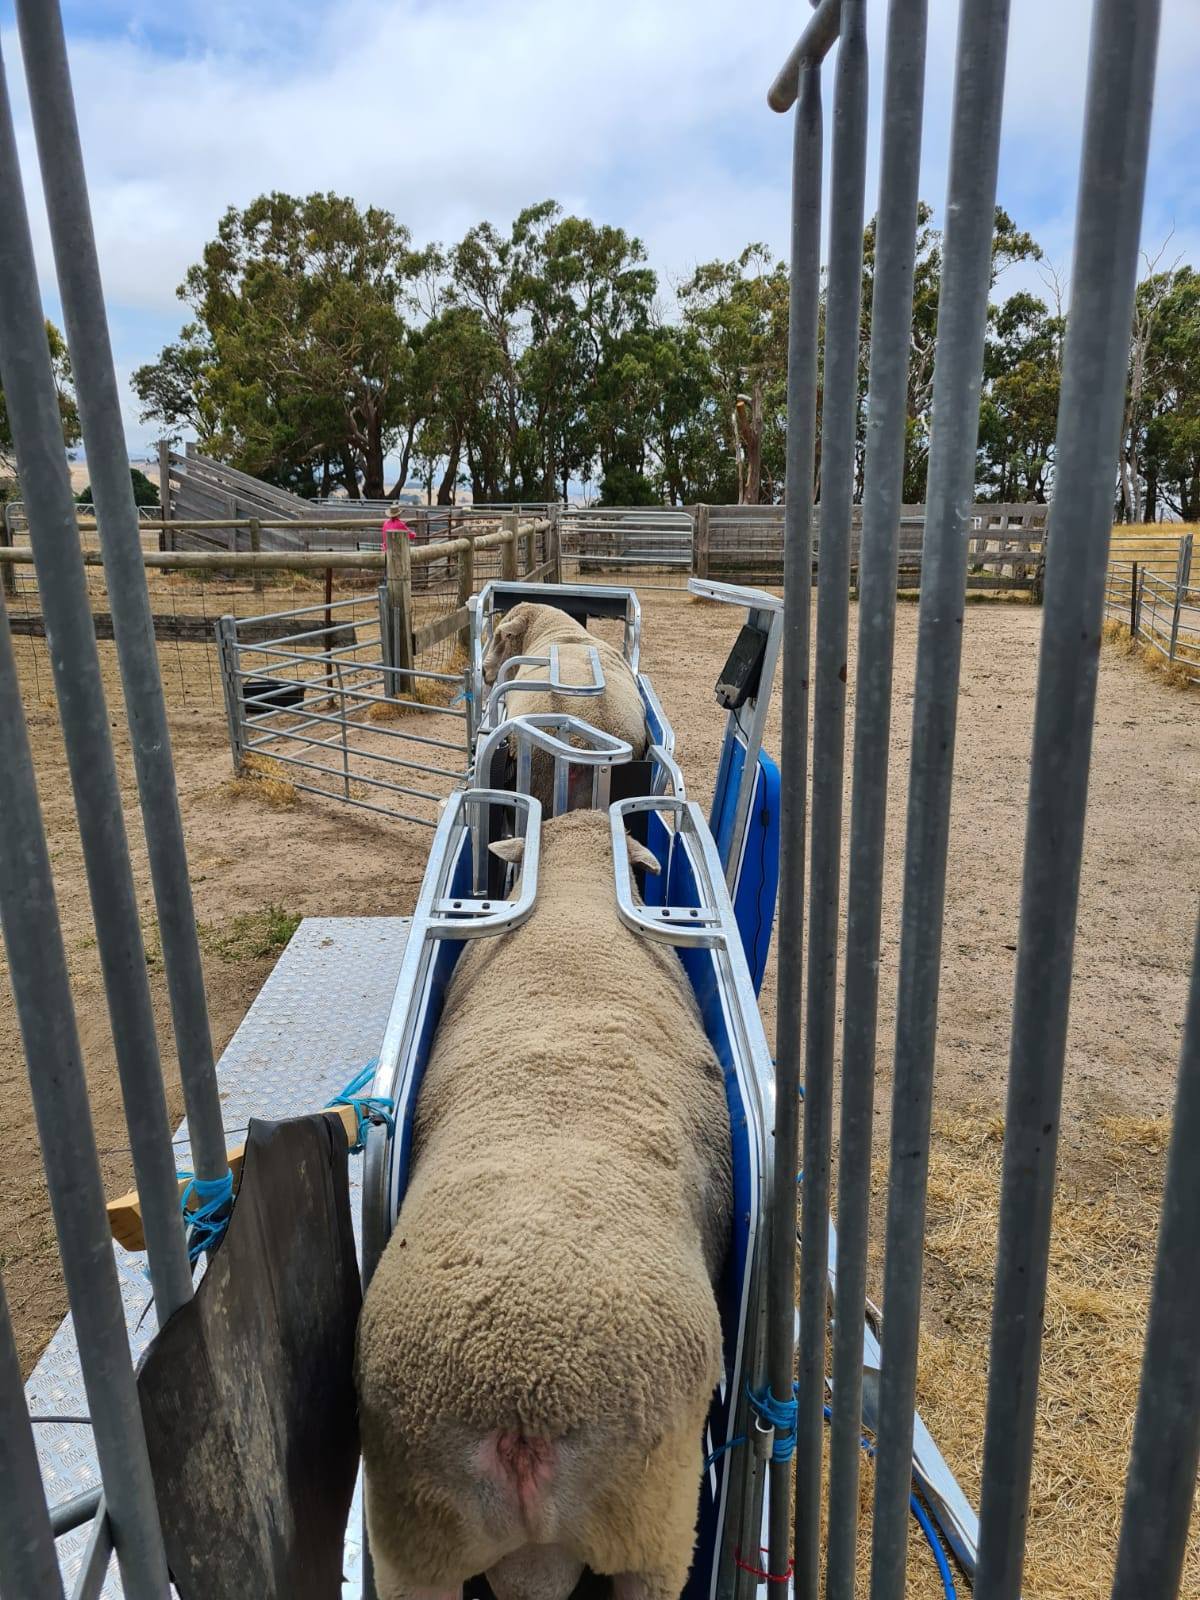 Equipment can be purchased to make sheep handling easier